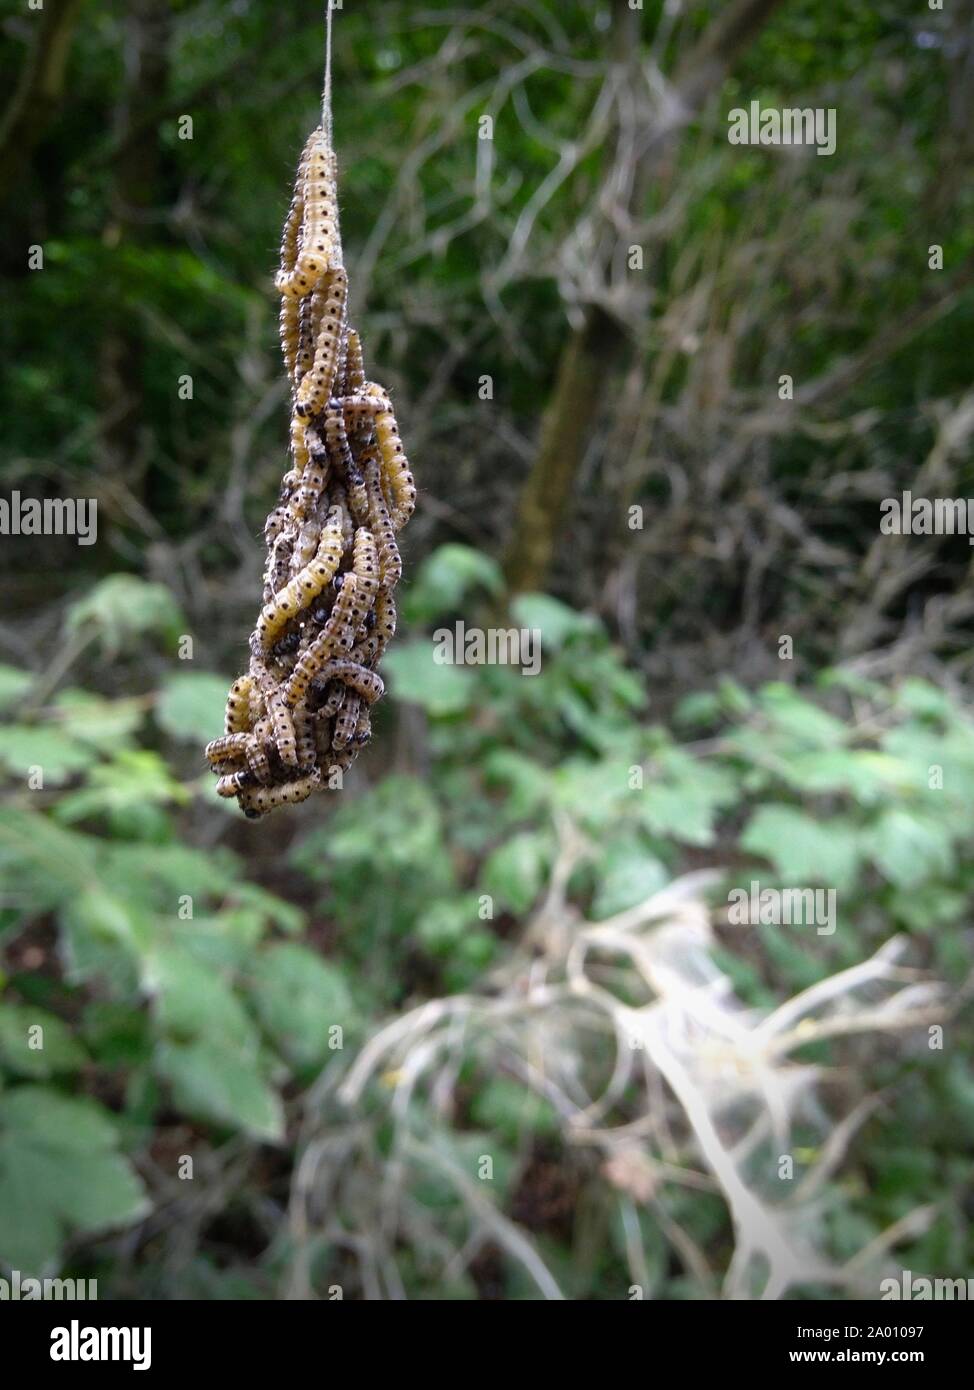 Close Up of Ermine Moth Larvae (Gespinstmotten Larven) dangling from a Web Stock Photo